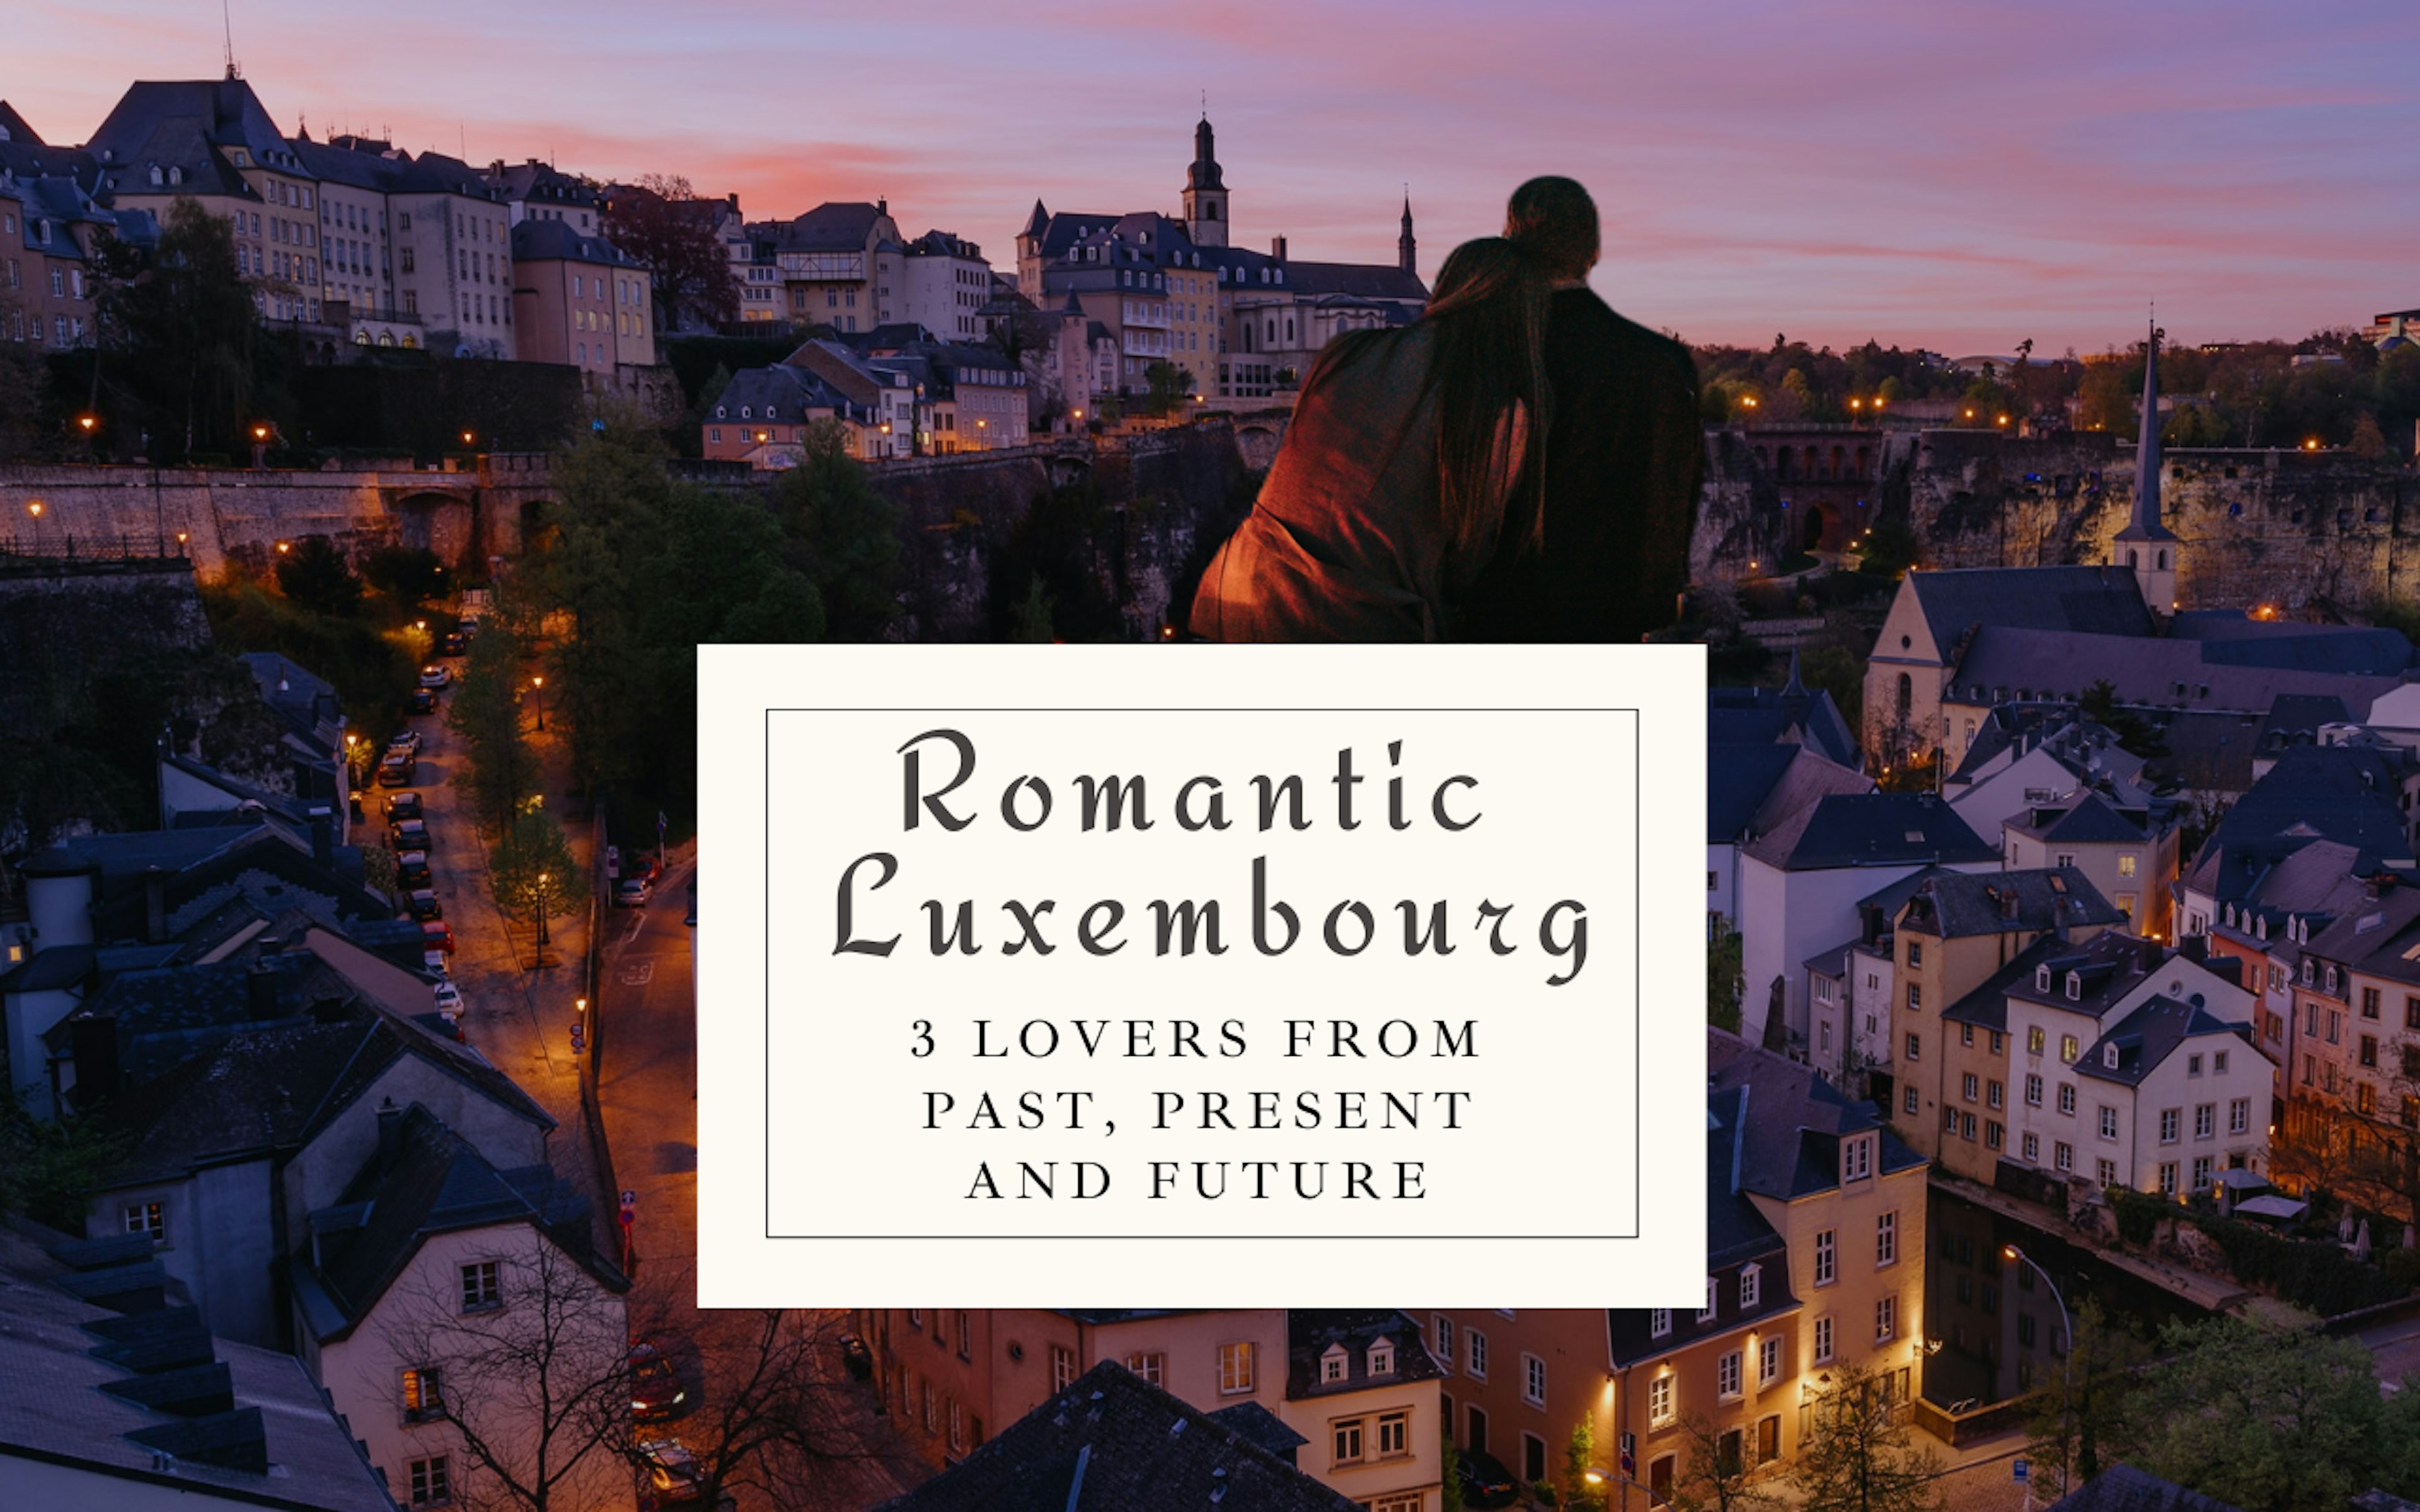 Romantic Luxembourg: 3 Lovers from past, present and future!